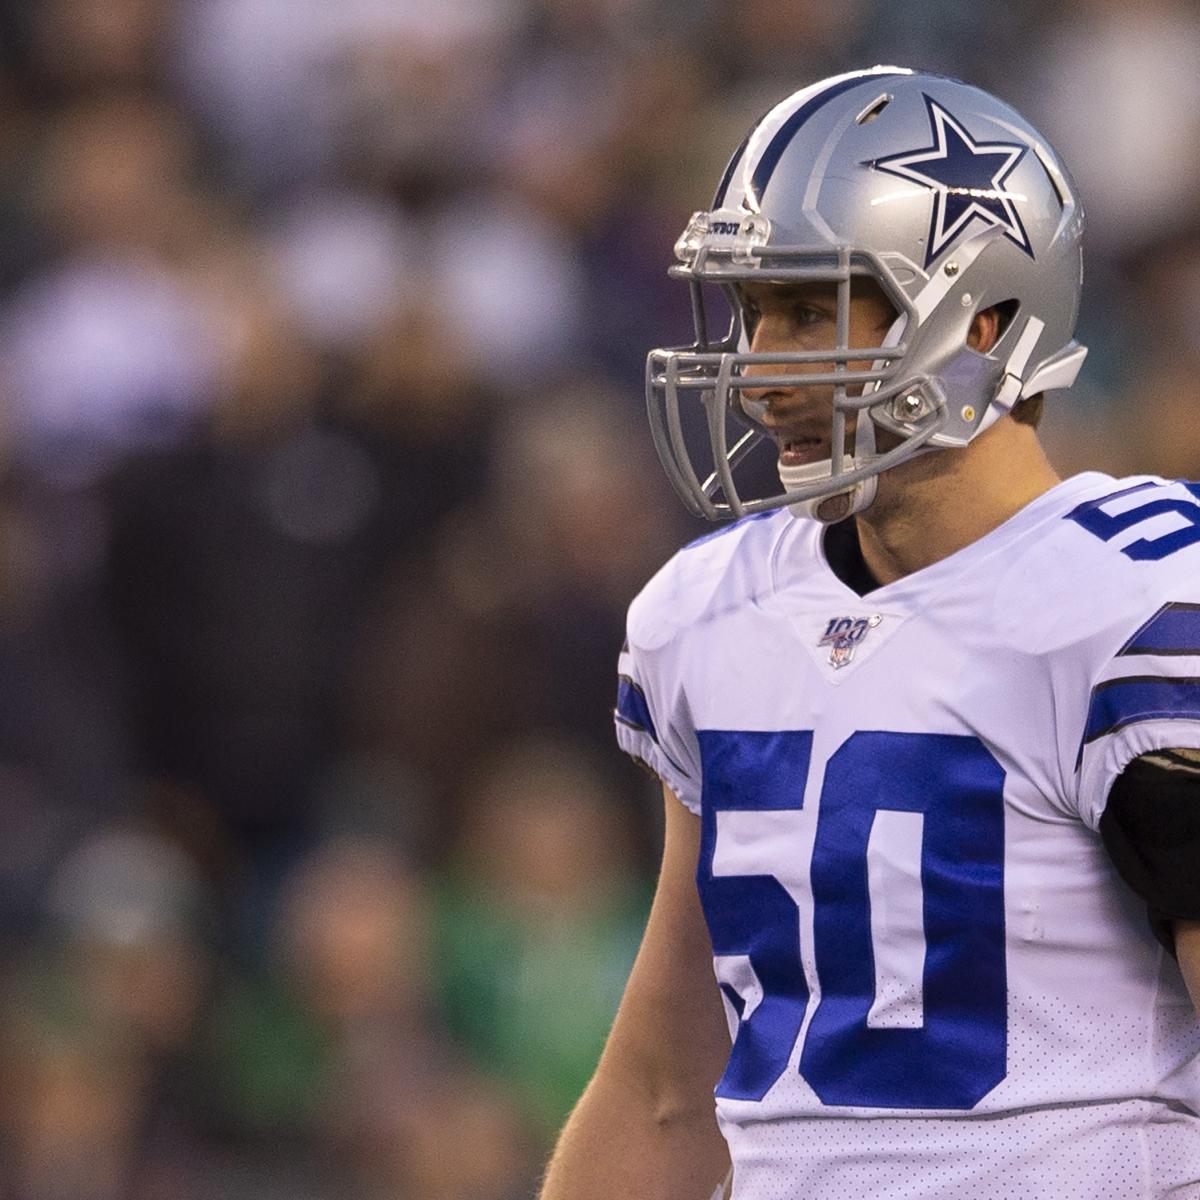 Cowboys News: Sean Lee 'Focusing on Playing' in 2020; Hopeful for